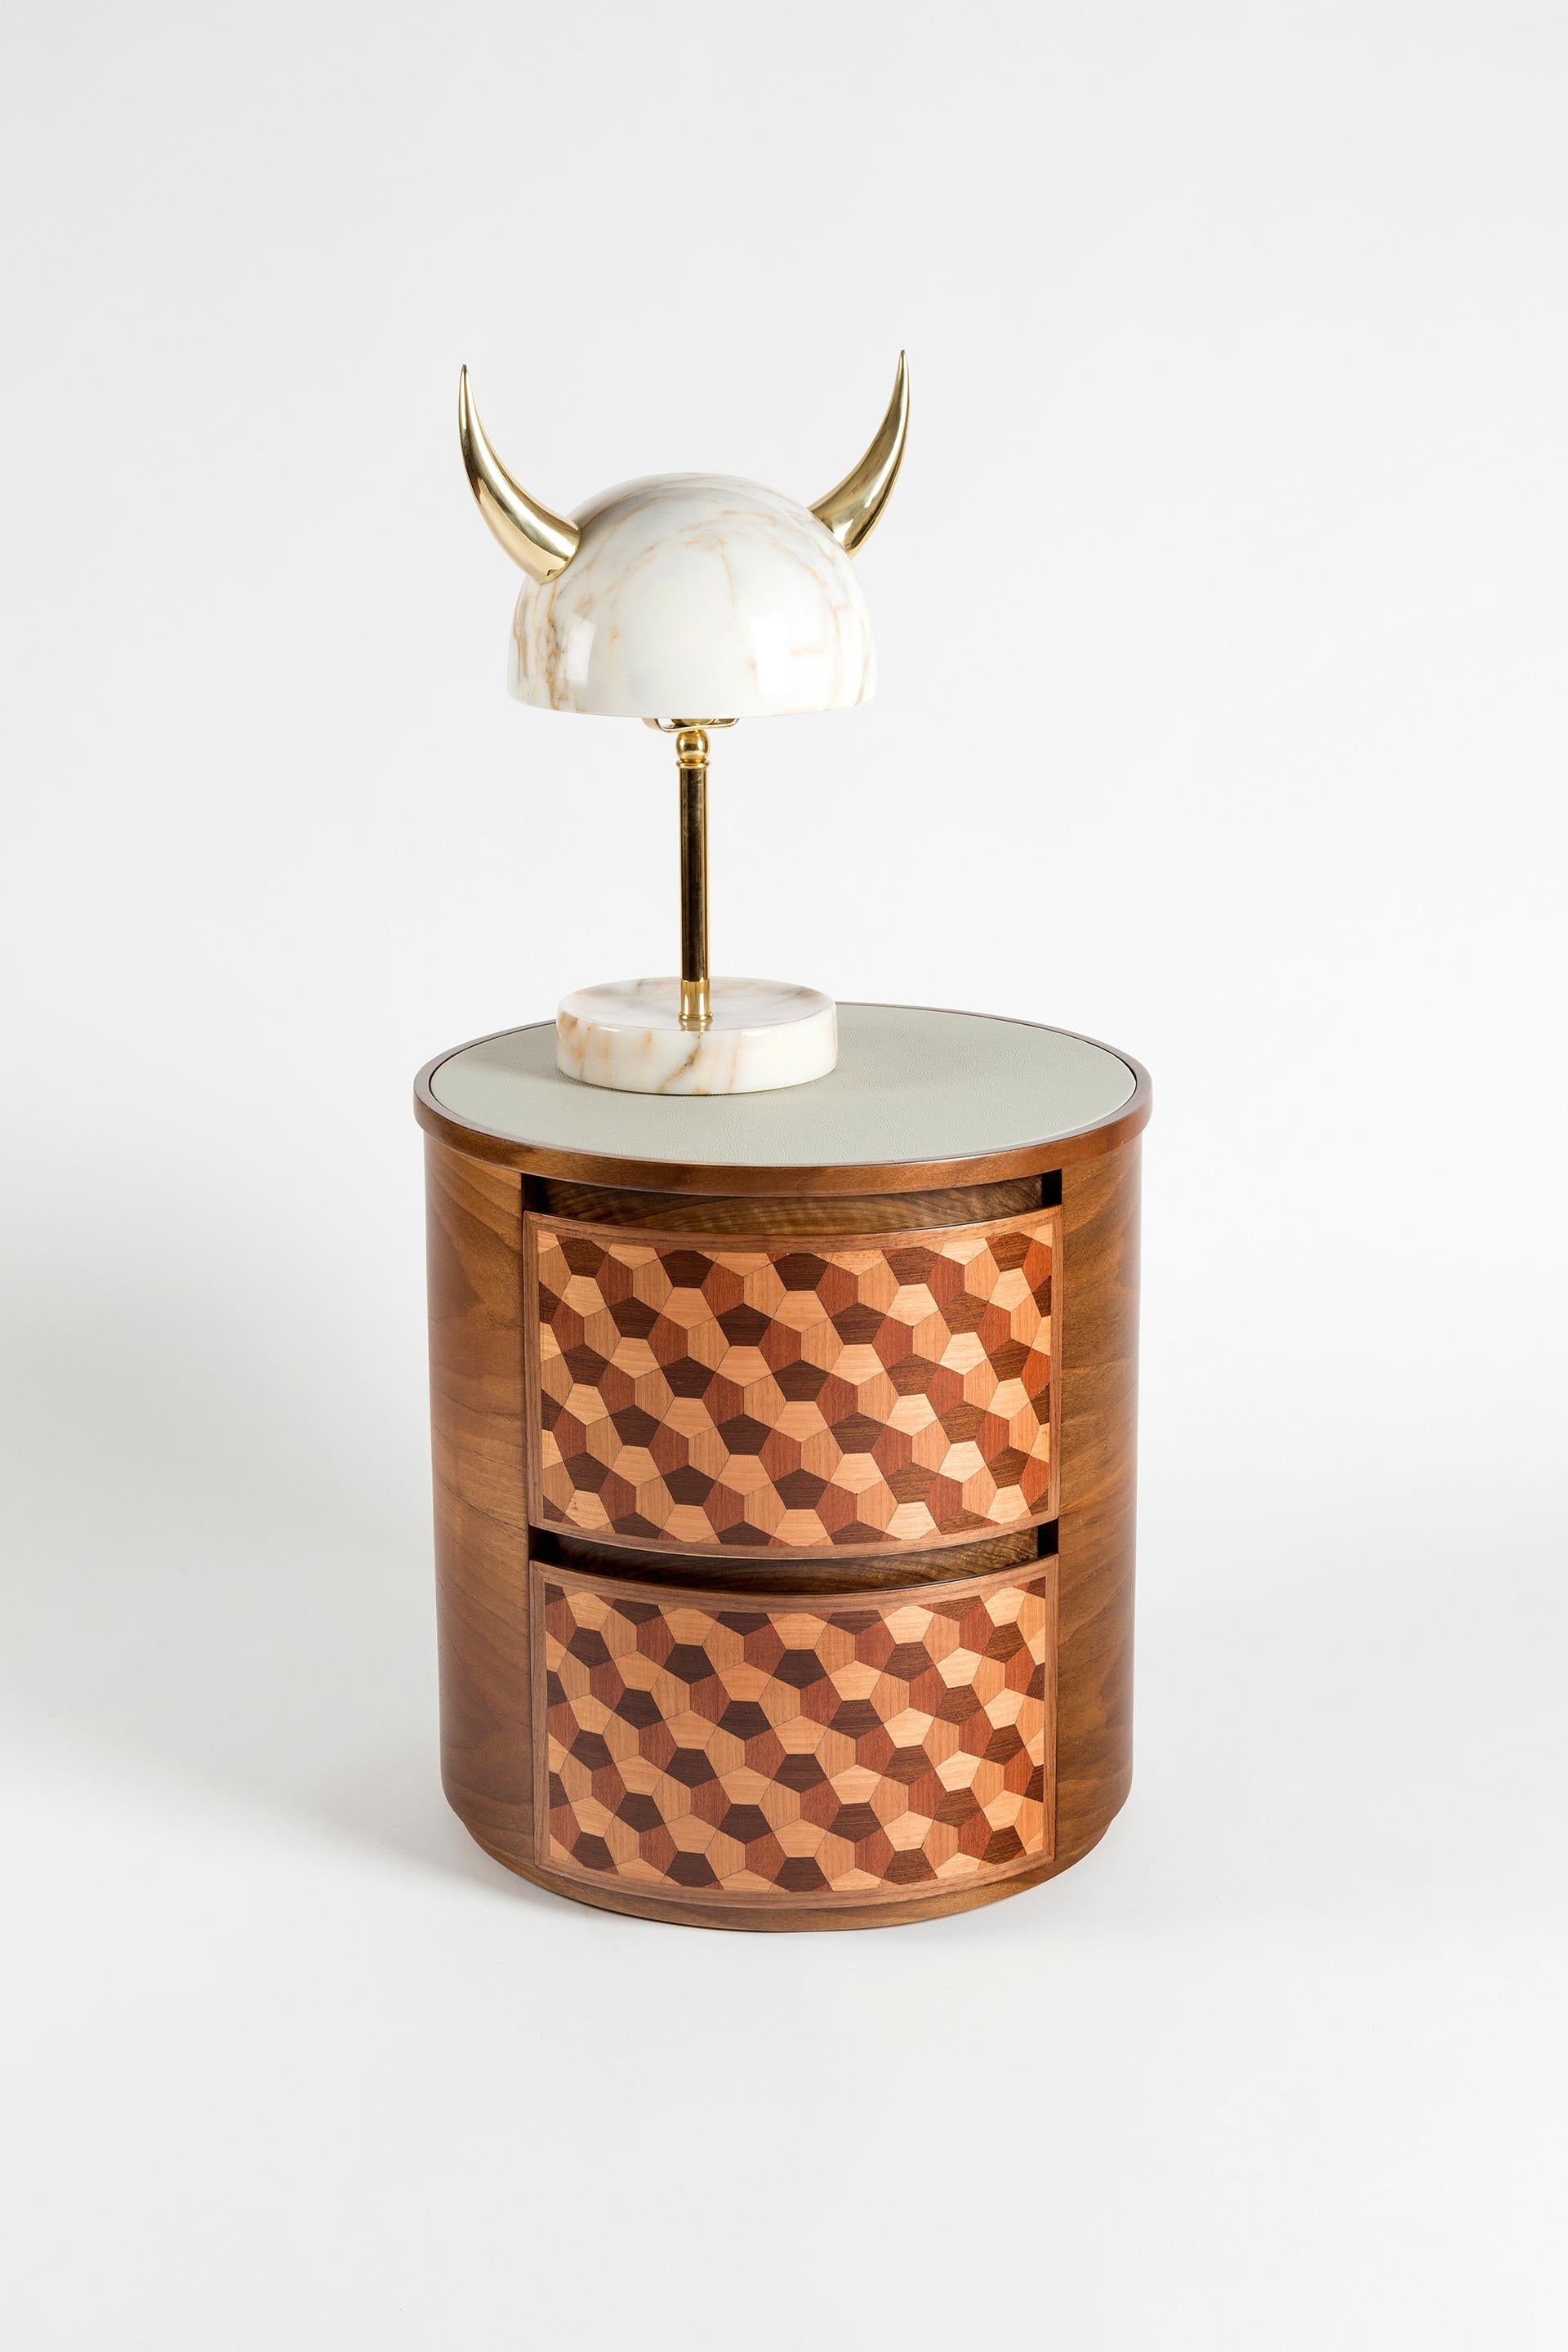 Other My Little Viking Marble and Brass Table Lamp by Merve Kahraman For Sale